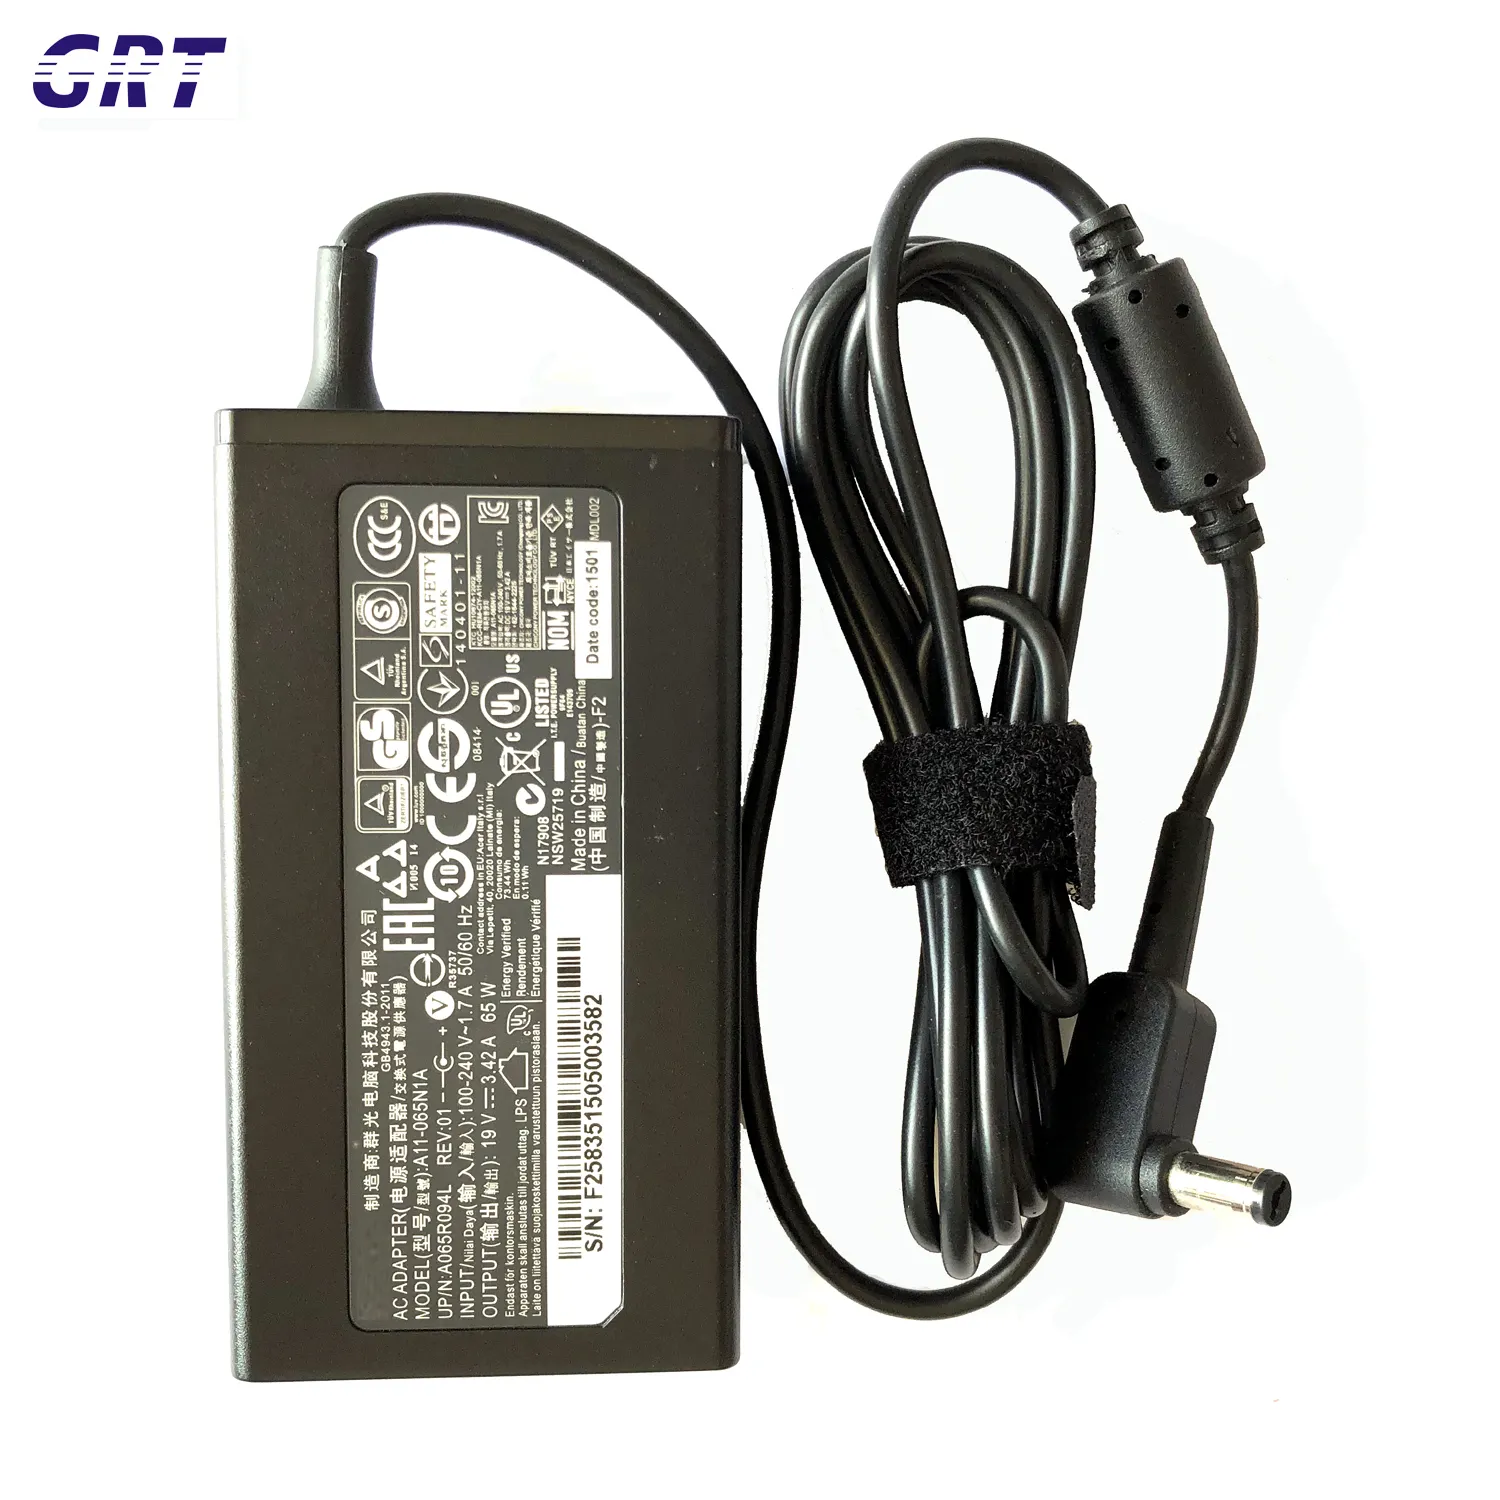 19V 3.42A 65W laptop ac adapter power charger 5.5 1.7mm For Acer Laptop 4736ZG 4738G